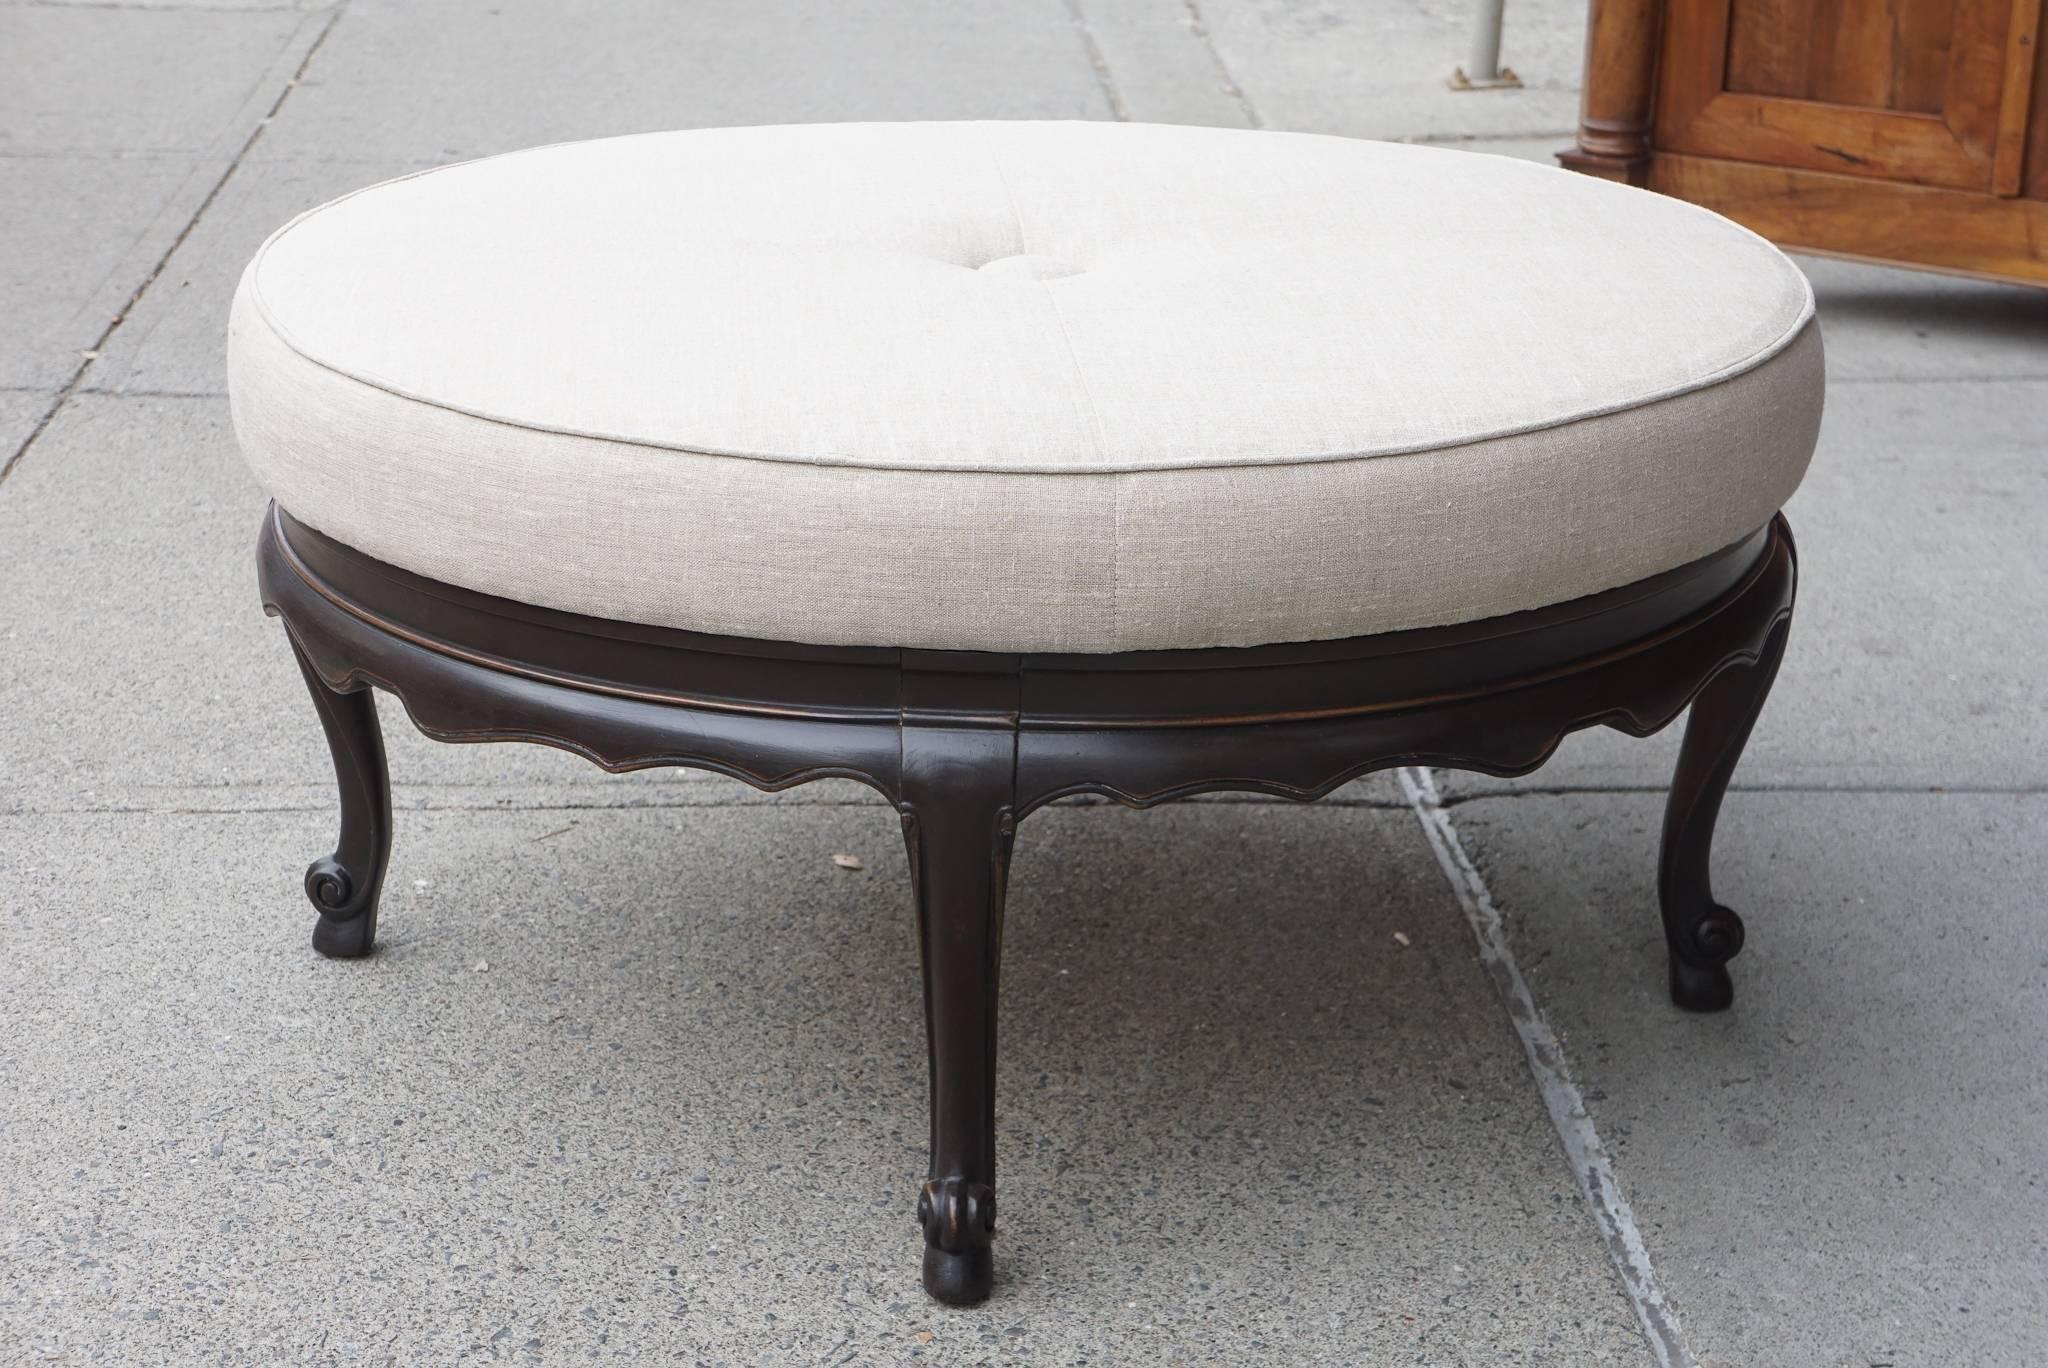 This vintage ottoman is made of carved walnut in a dark Jacobean stain with nice rub thru to the carved areas. The pouf covered in linen is newly upholstered ( we had this done and know that all materials are new) and somewhat harder than a regular